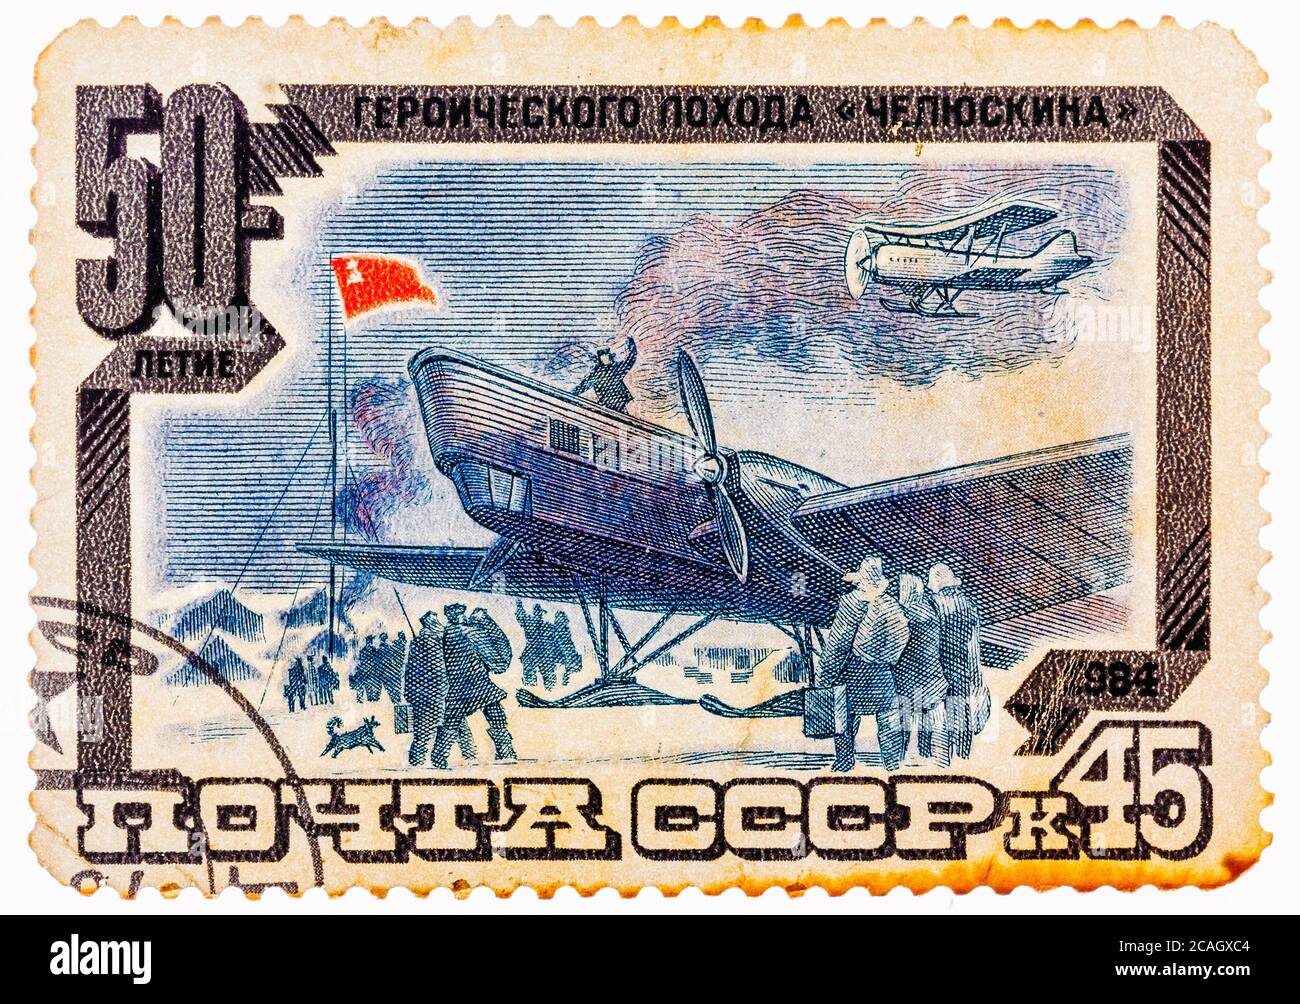 Stamp printed in USSR (Russia) shows plane, rescue crew with inscription and name of series '50th Anniversary of Tchelyuskin Arctic Expedition' Stock Photo